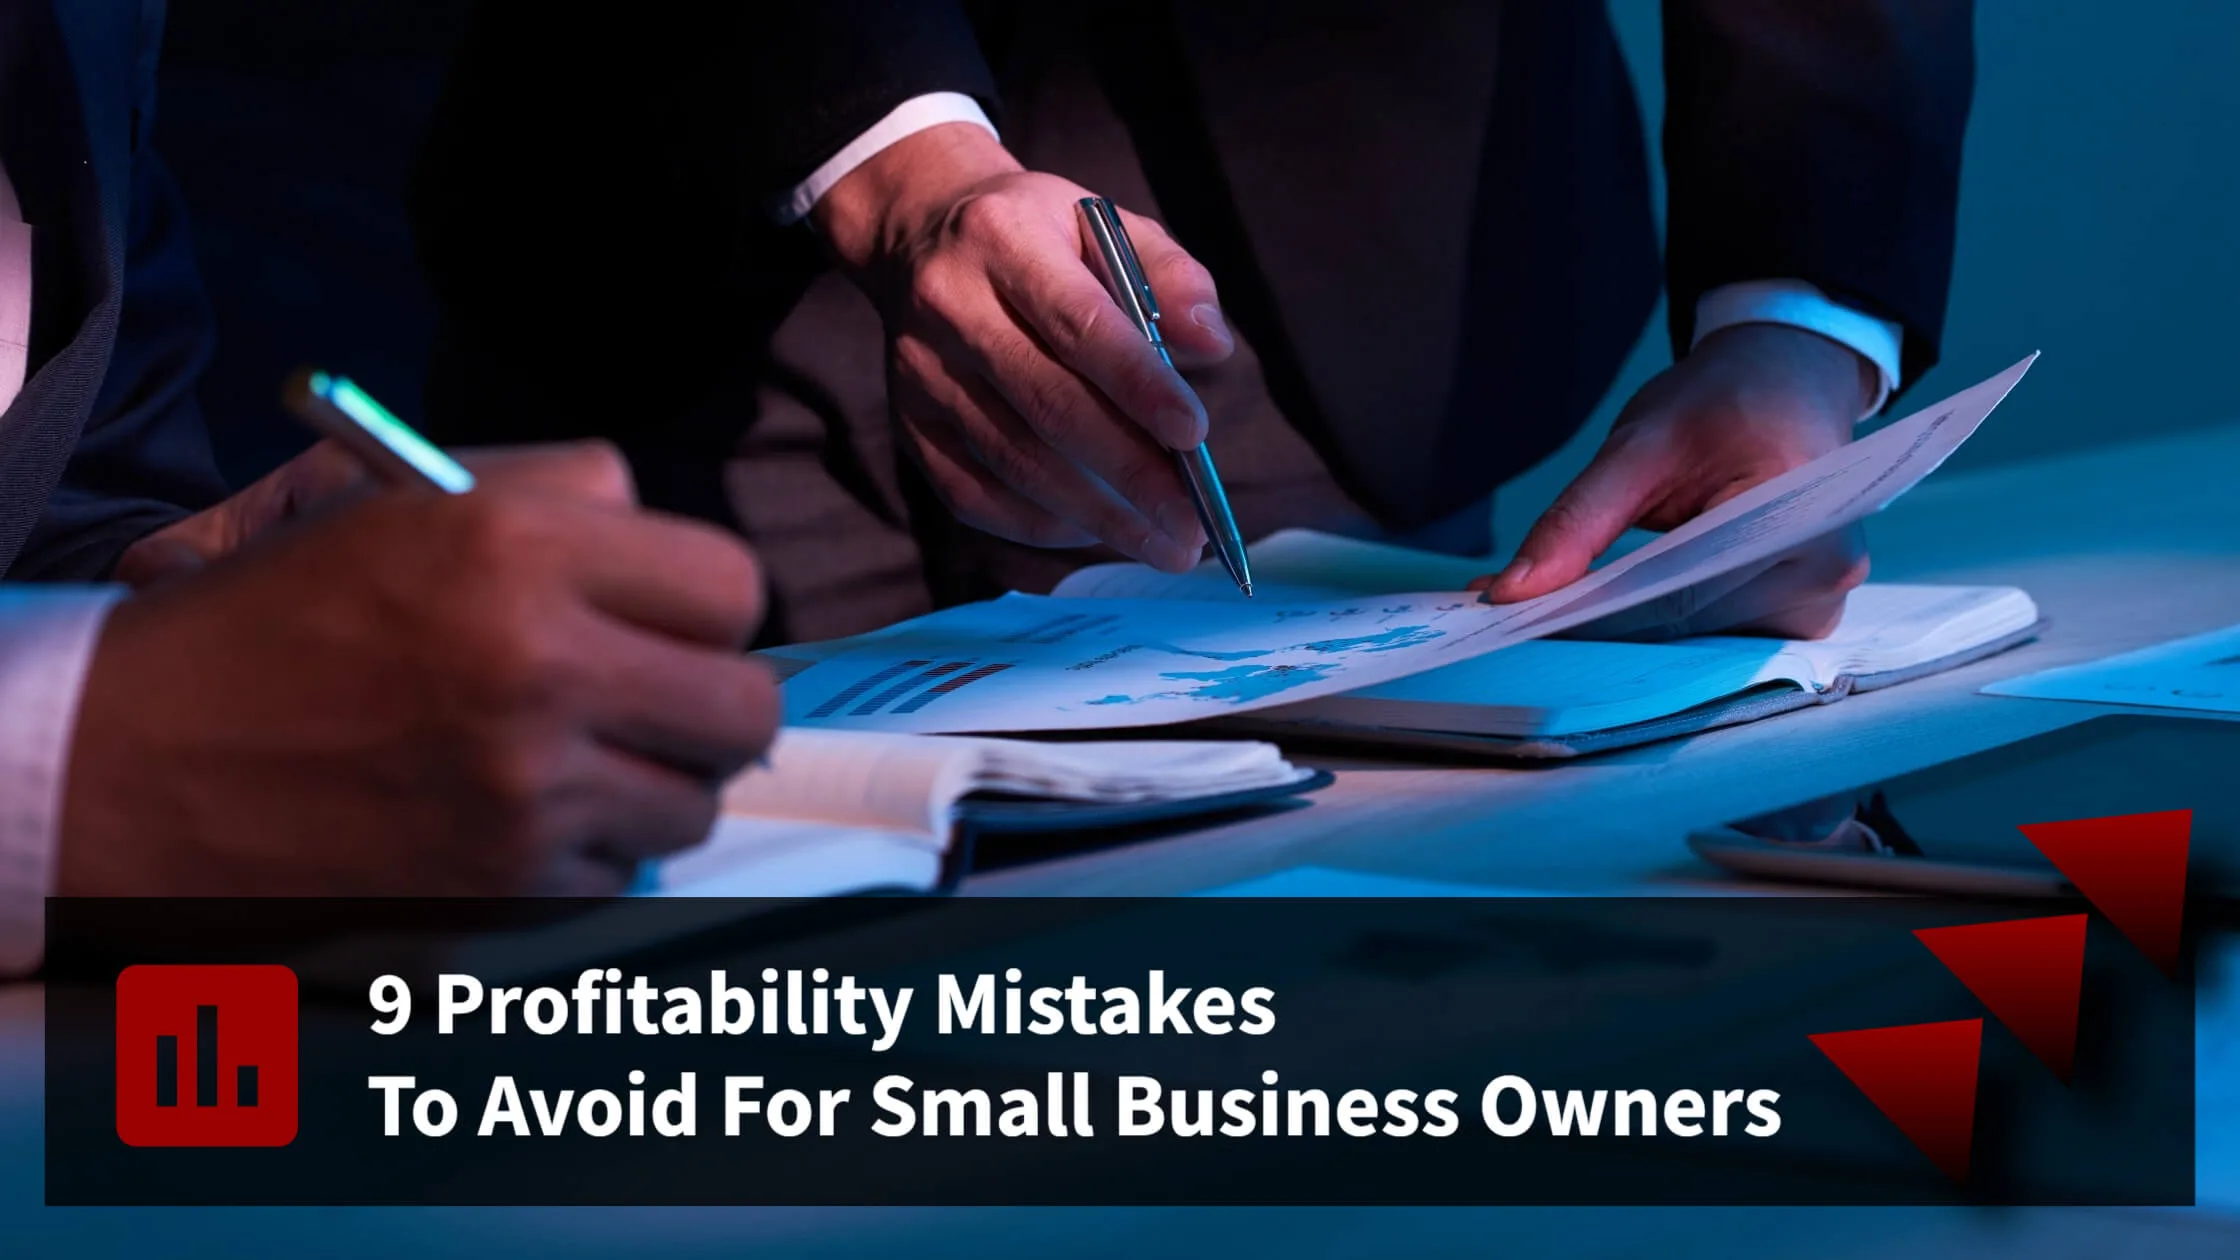 9 Profitability Mistakes To Avoid For Small Business Owners